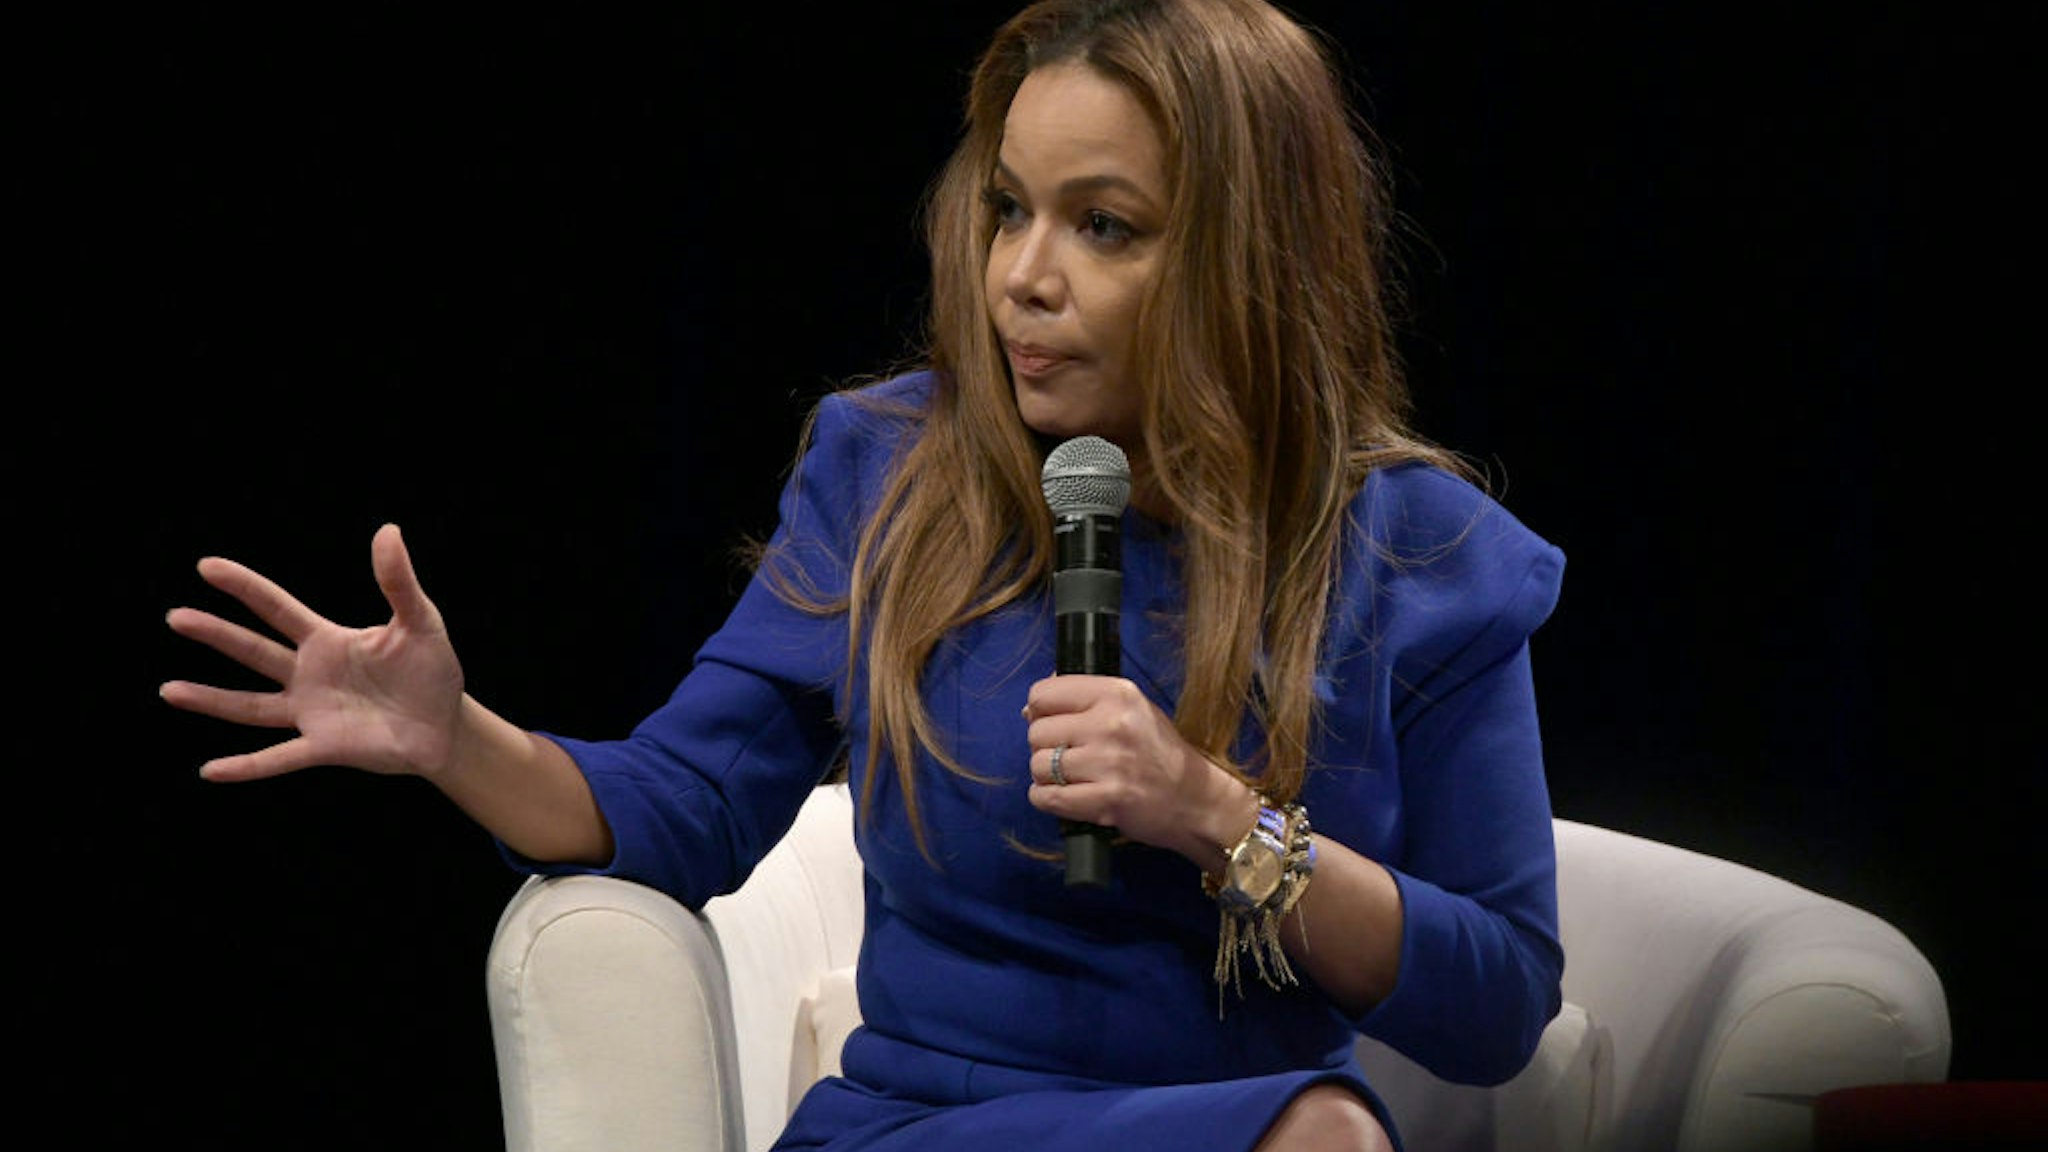 NEW YORK, NY - SEPTEMBER 28: Journalist Sunny Hostin speaks at the first-ever #SheIsEqual Summit co-hosted by three leading organizations - P&amp;G, Global Citizen and the ANA #SeeHer initiative - as they come together to inspire broader action for gender equality during UN General Assembly Week on September 28, 2018 in New York City. (Photo by Leigh Vogel/Getty Images for Procter &amp; Gamble)